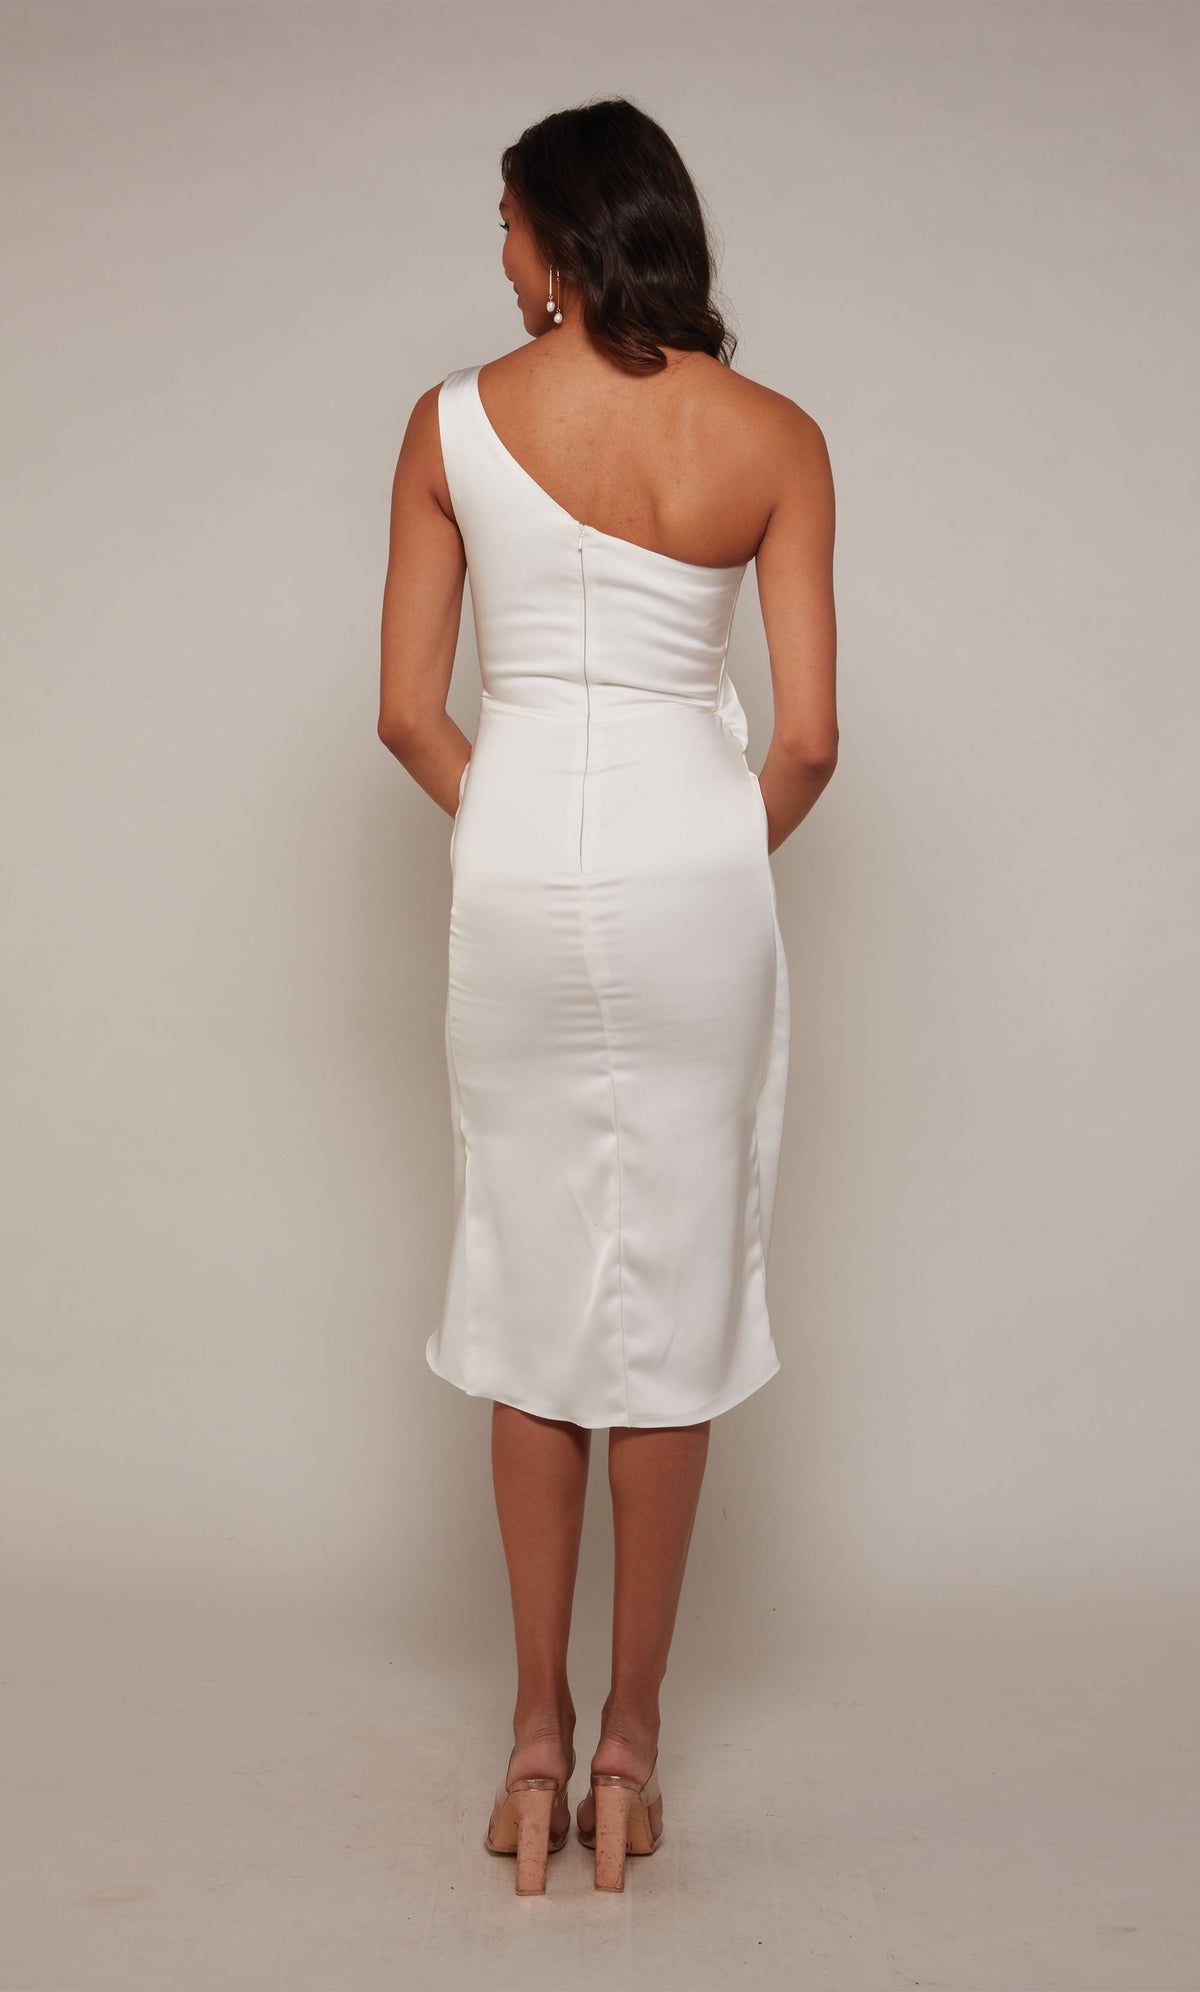 A satin wedding dress with a one shoulder neckline, a zip-up back, and an asymmetrical hemline in diamond white.